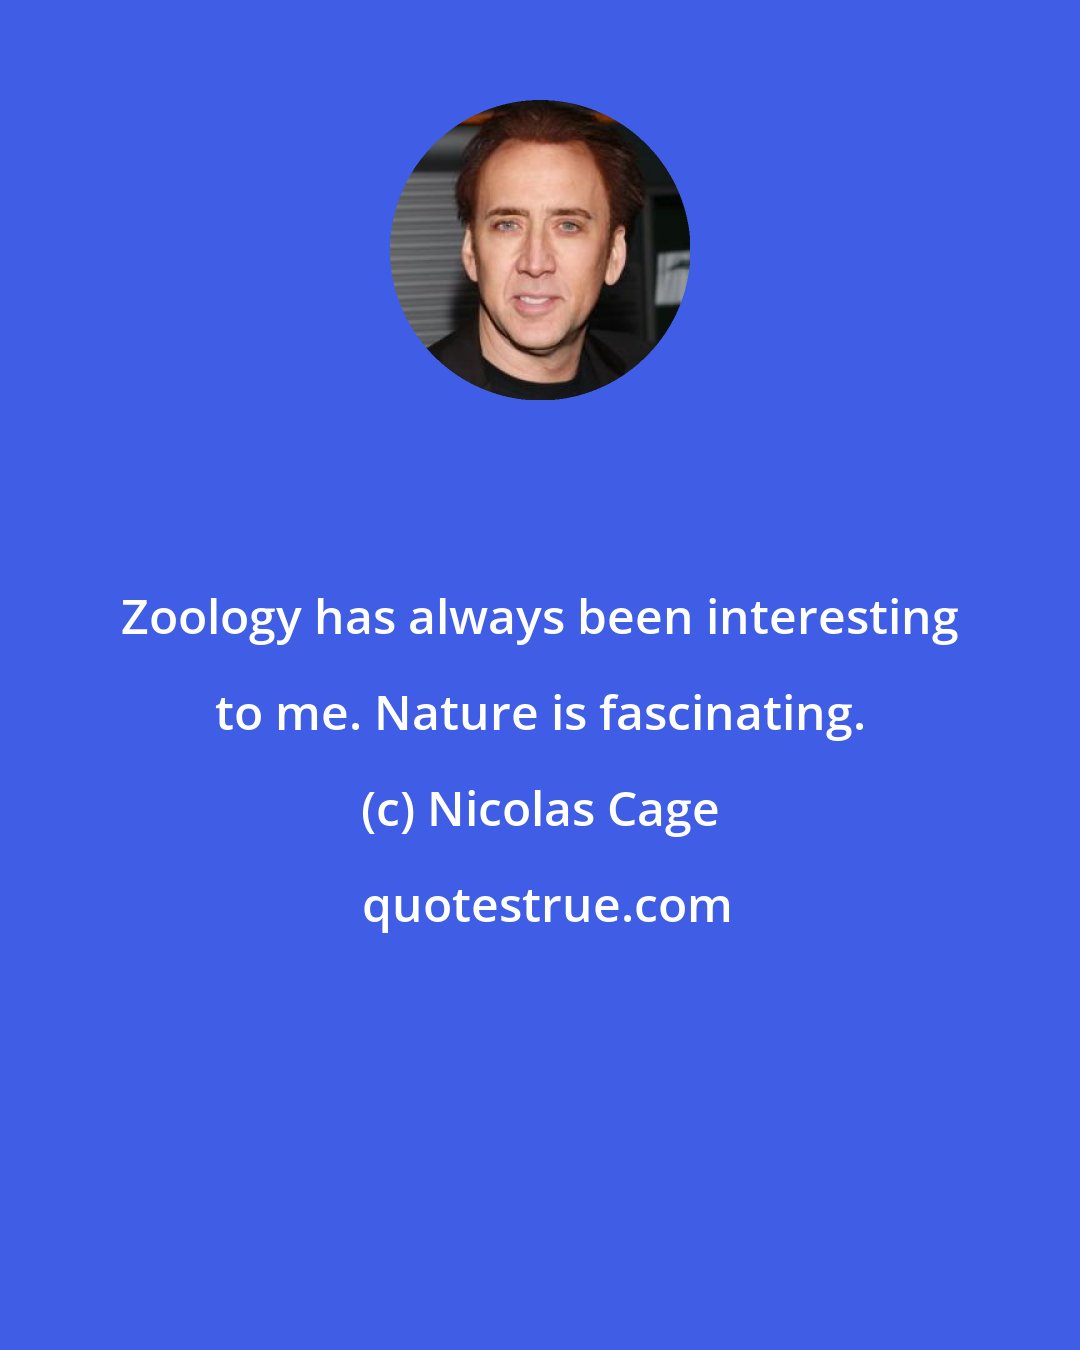 Nicolas Cage: Zoology has always been interesting to me. Nature is fascinating.